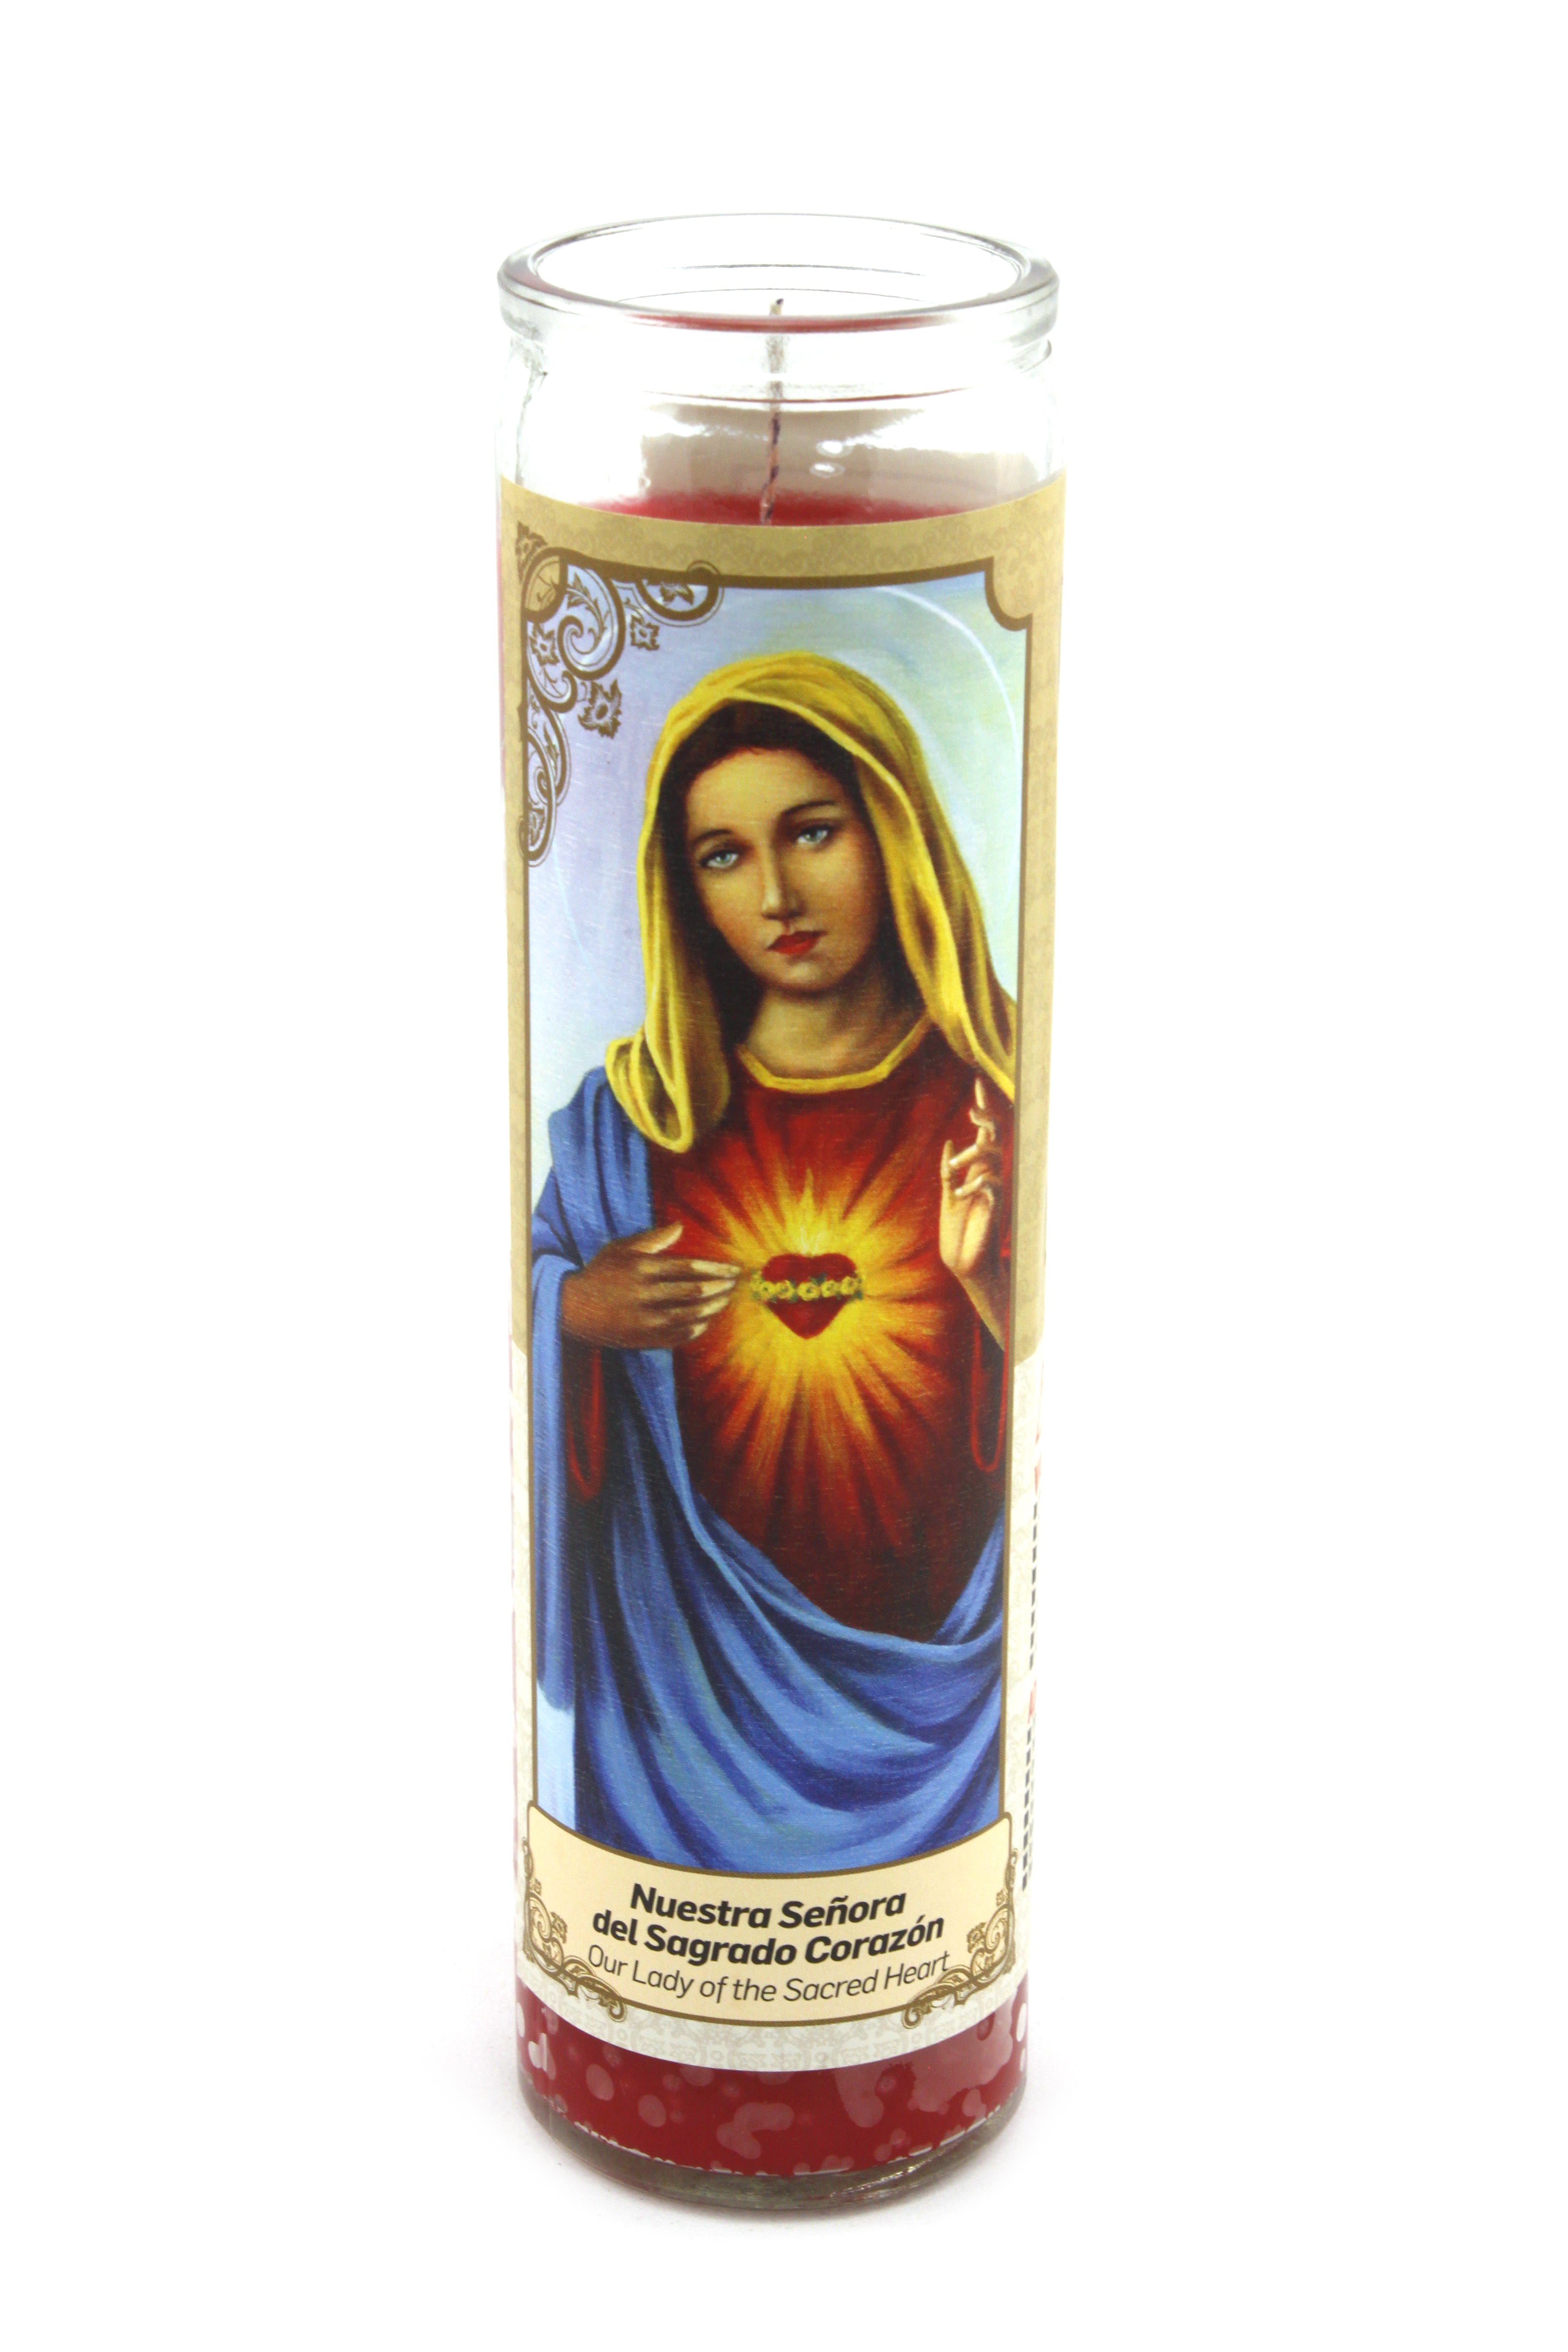 Candles Immaculate Heart of Mary - Velones Inmaculado Corazon de Maria